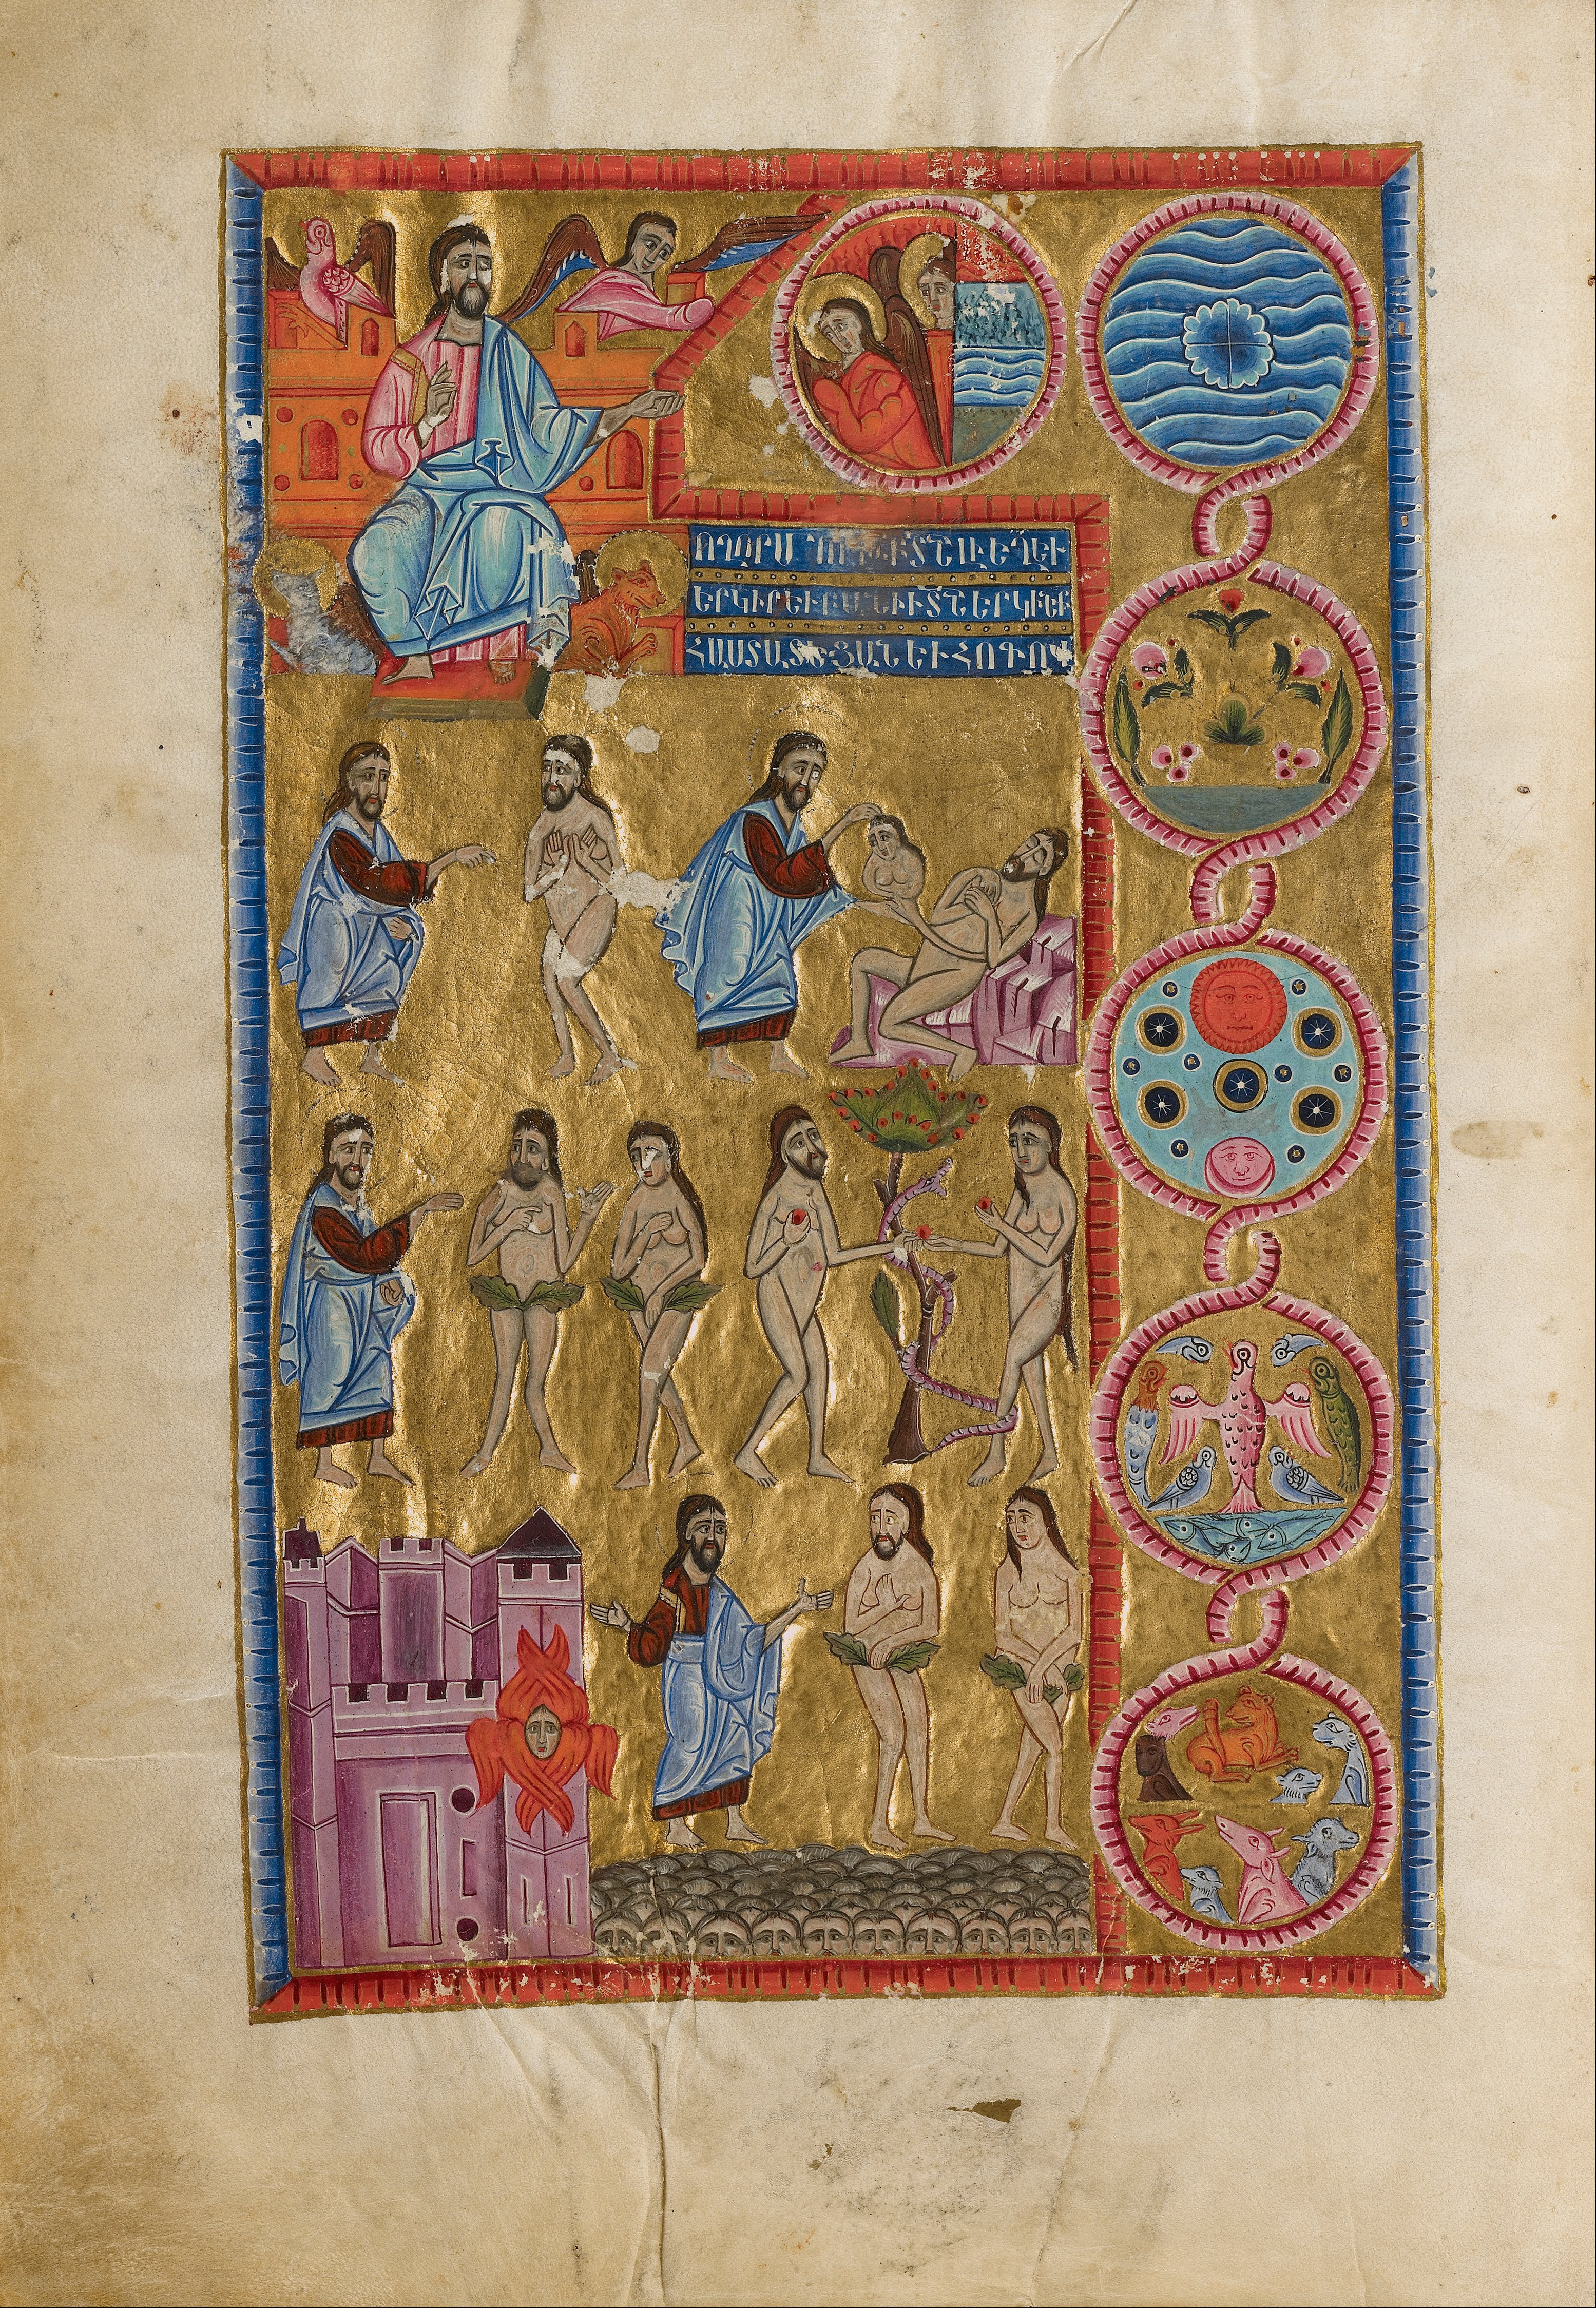 Scenes from the Bible, including the creation of Adam and Eve, and the Garden of Eden, from an Armenian manuscript illuminated by Malnazar and Aghapir, Isfahan, dated to 1637-1638